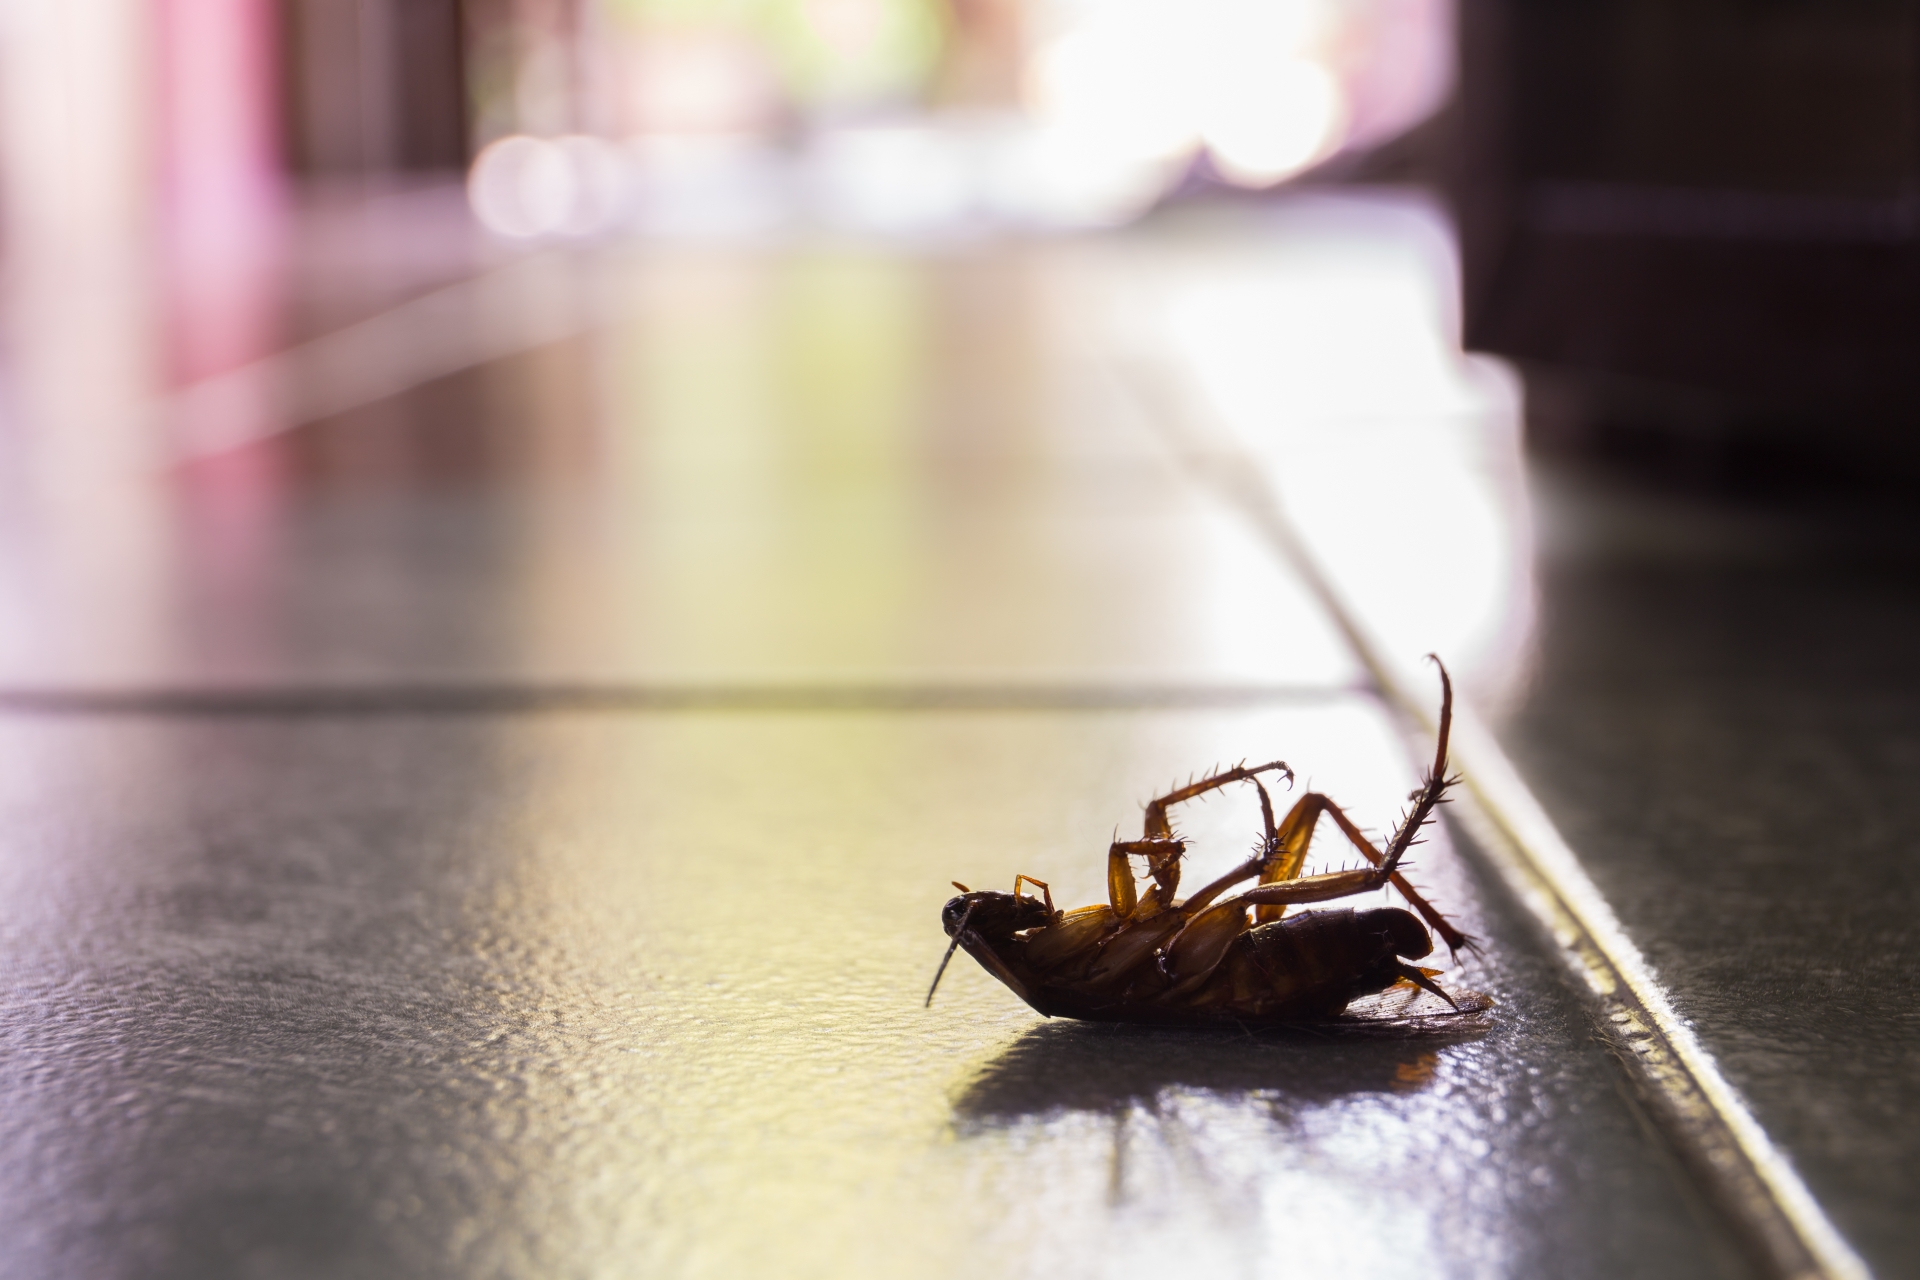 Cockroach Control, Pest Control in Hither Green, SE13. Call Now 020 8166 9746